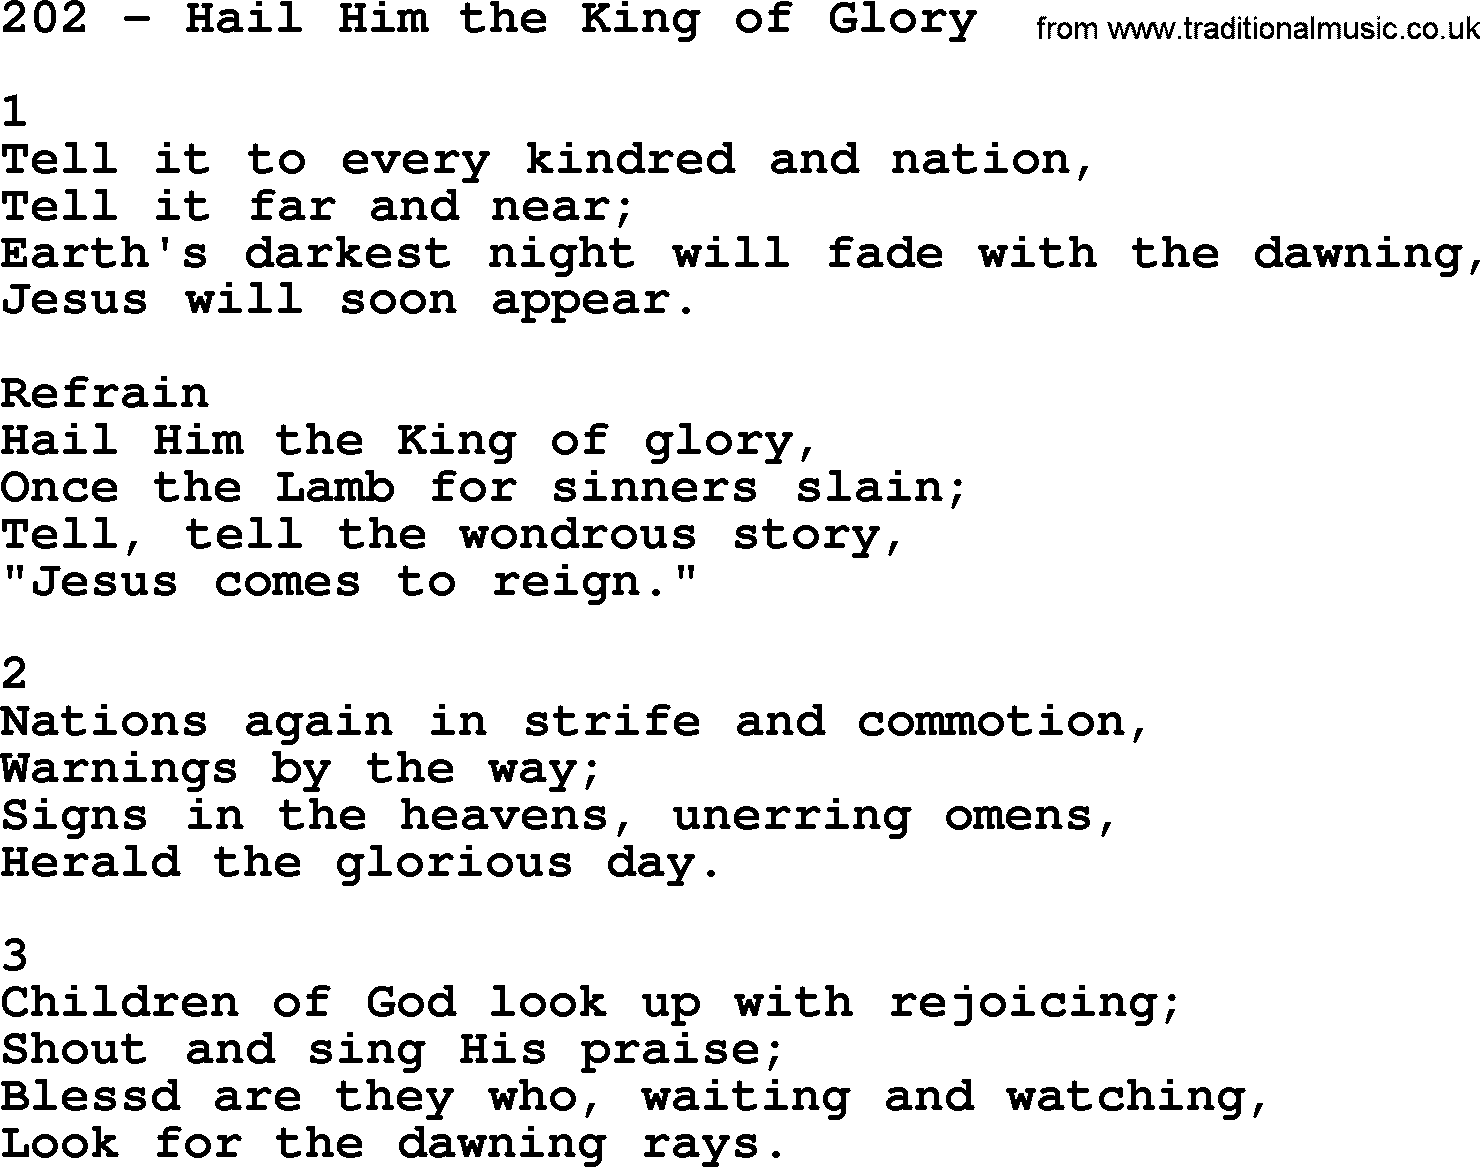 Complete Adventis Hymnal, title: 202-Hail Him The King Of Glory, with lyrics, midi, mp3, powerpoints(PPT) and PDF,